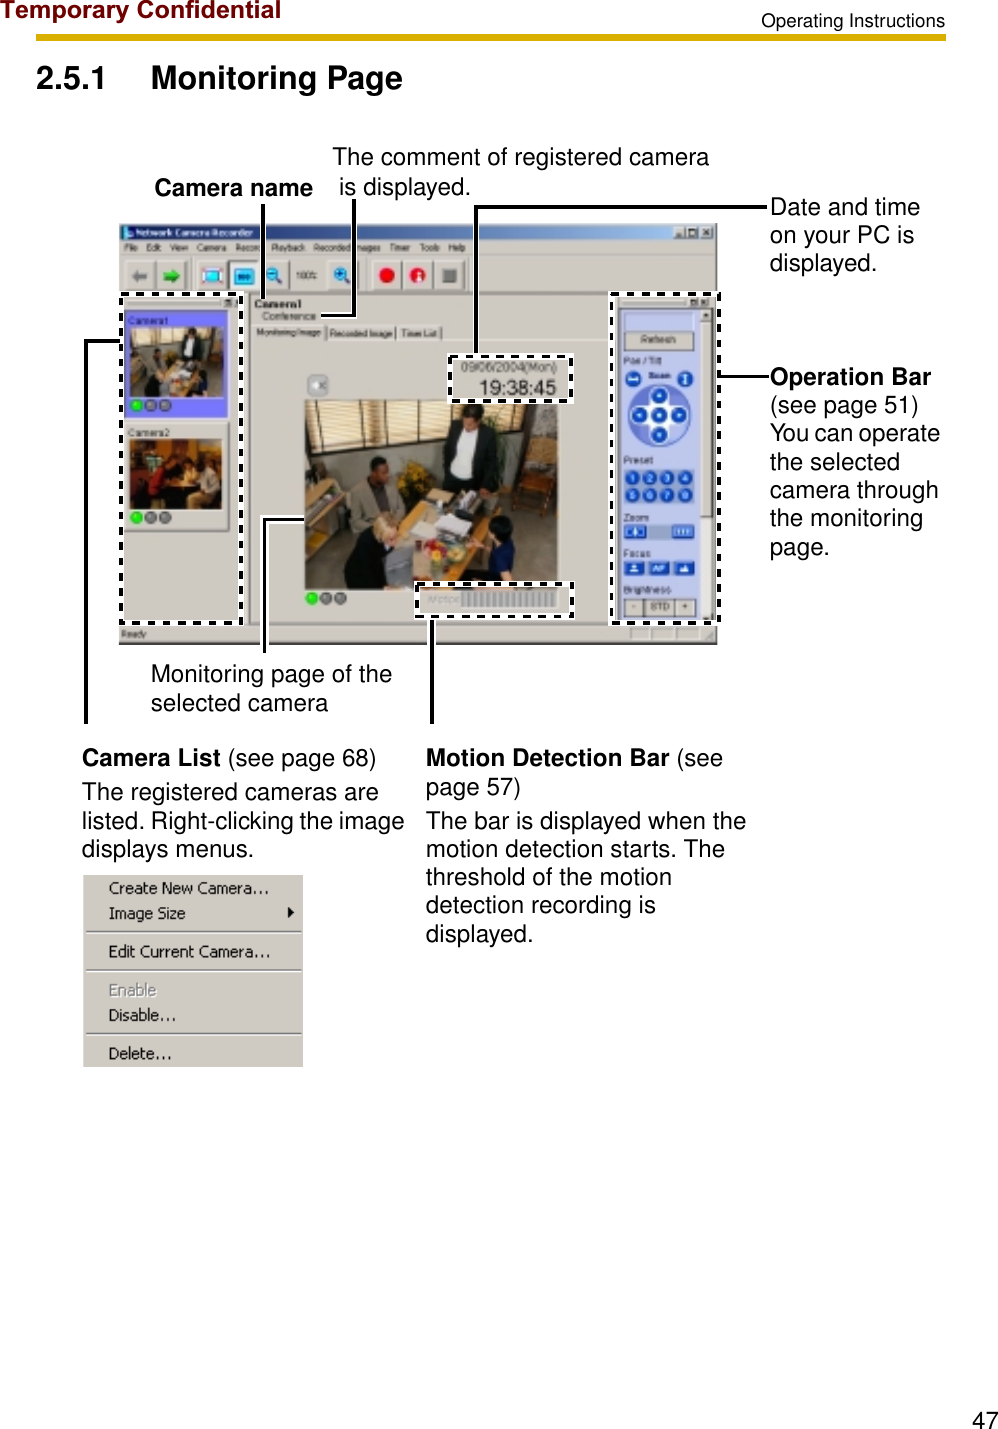 Operating Instructions472.5.1 Monitoring PageDate and time on your PC is displayed.Operation Bar(see page 51)You can operate the selected camera through the monitoring page.Camera List (see page 68)The registered cameras are listed. Right-clicking the image displays menus.Motion Detection Bar (see page 57)The bar is displayed when the motion detection starts. The threshold of the motion detection recording is displayed.The comment of registered camera is displayed.Monitoring page of the selected cameraCamera nameTemporary Confidential